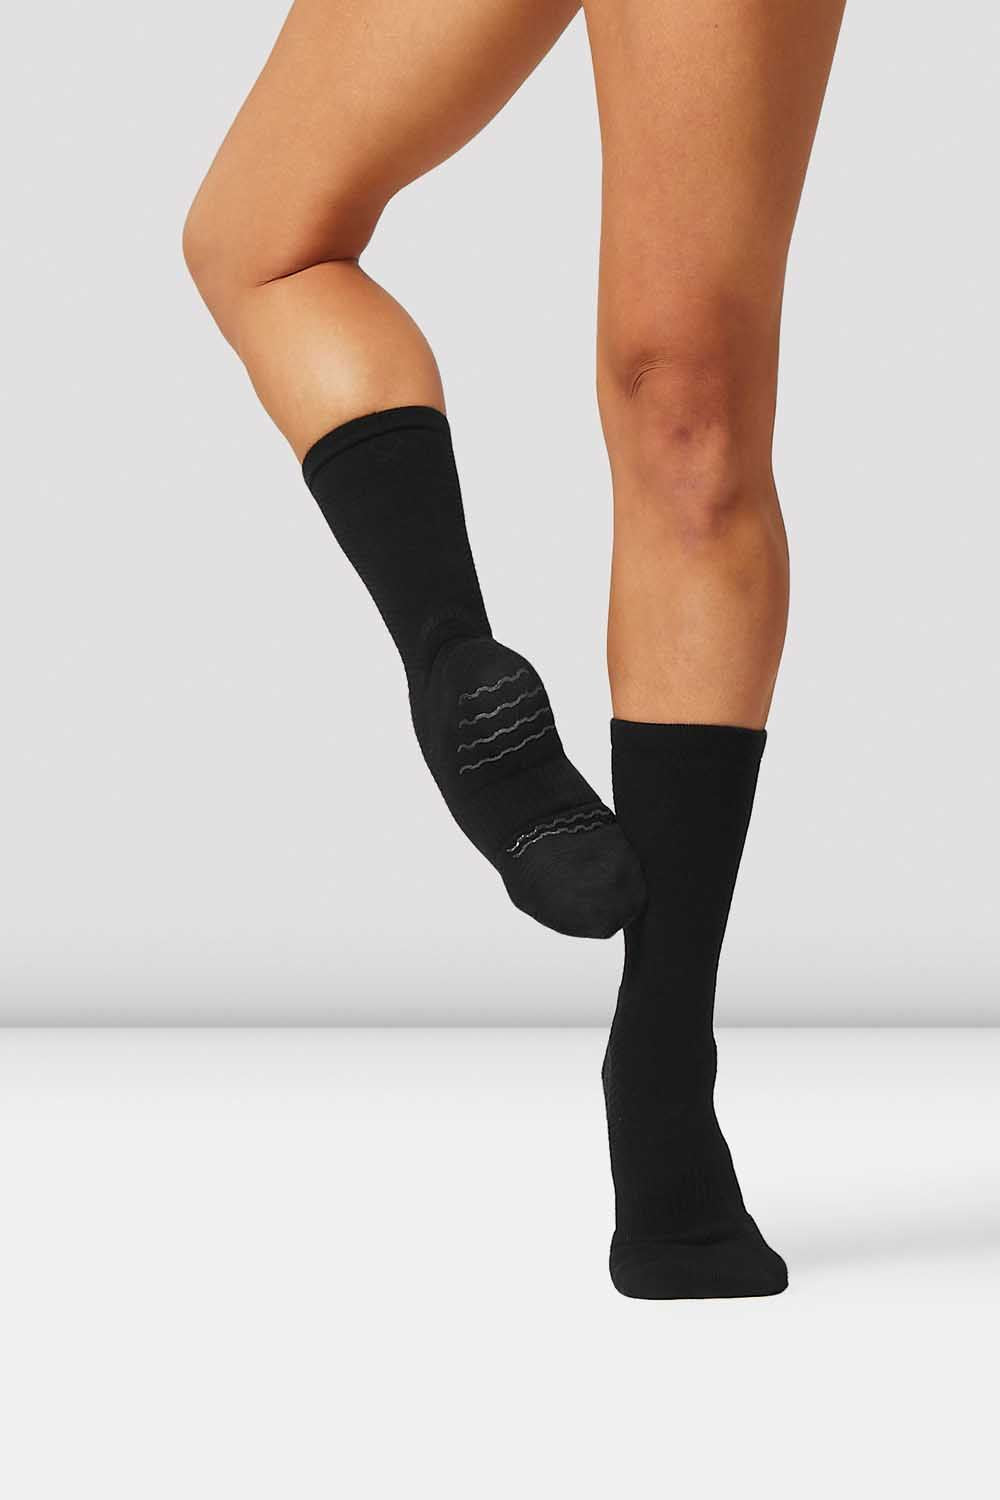 Bloch Sox Now In Stock! - Blogs by Dance and Fitness